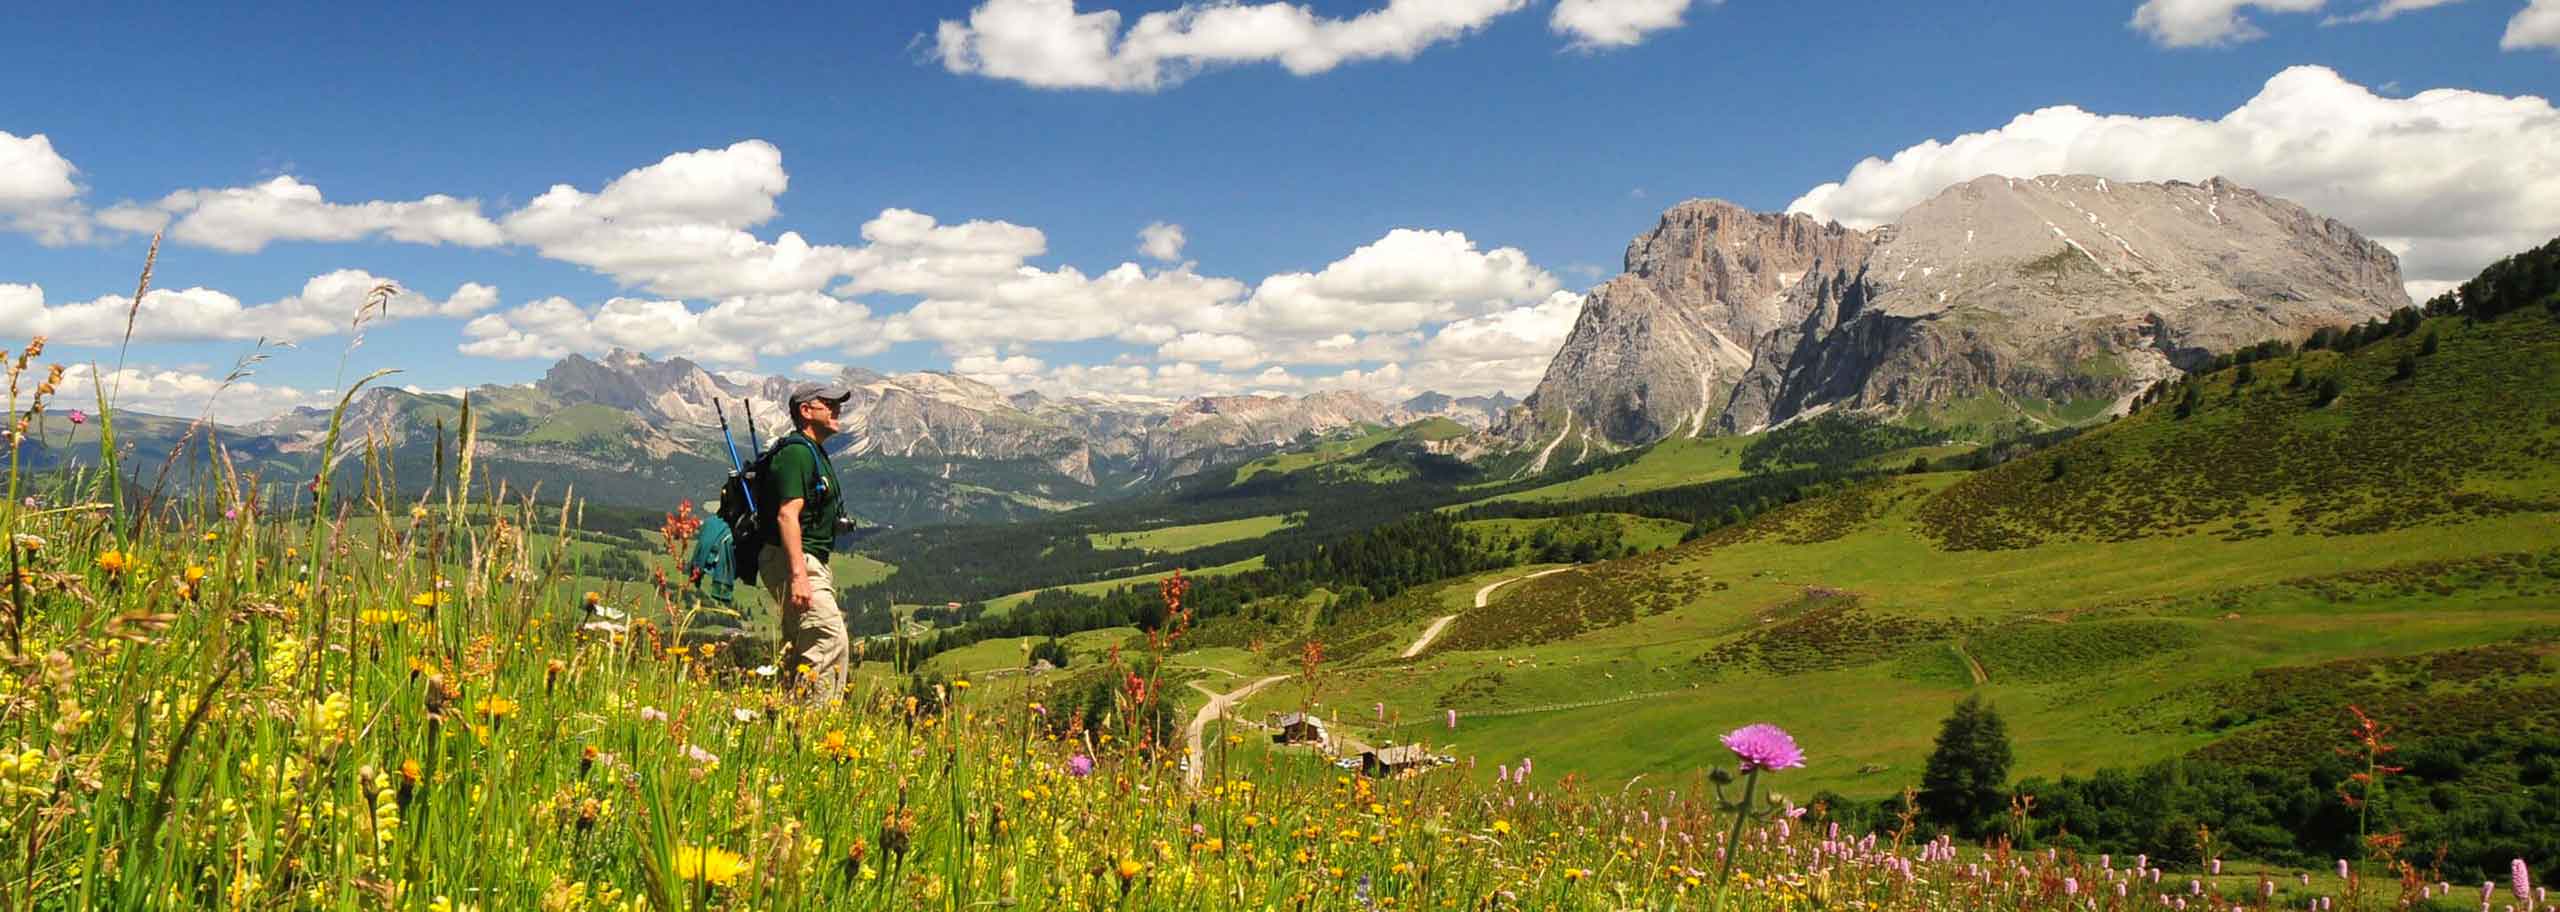 Trekking with a Mountain Guide in the Alpe di Siusi